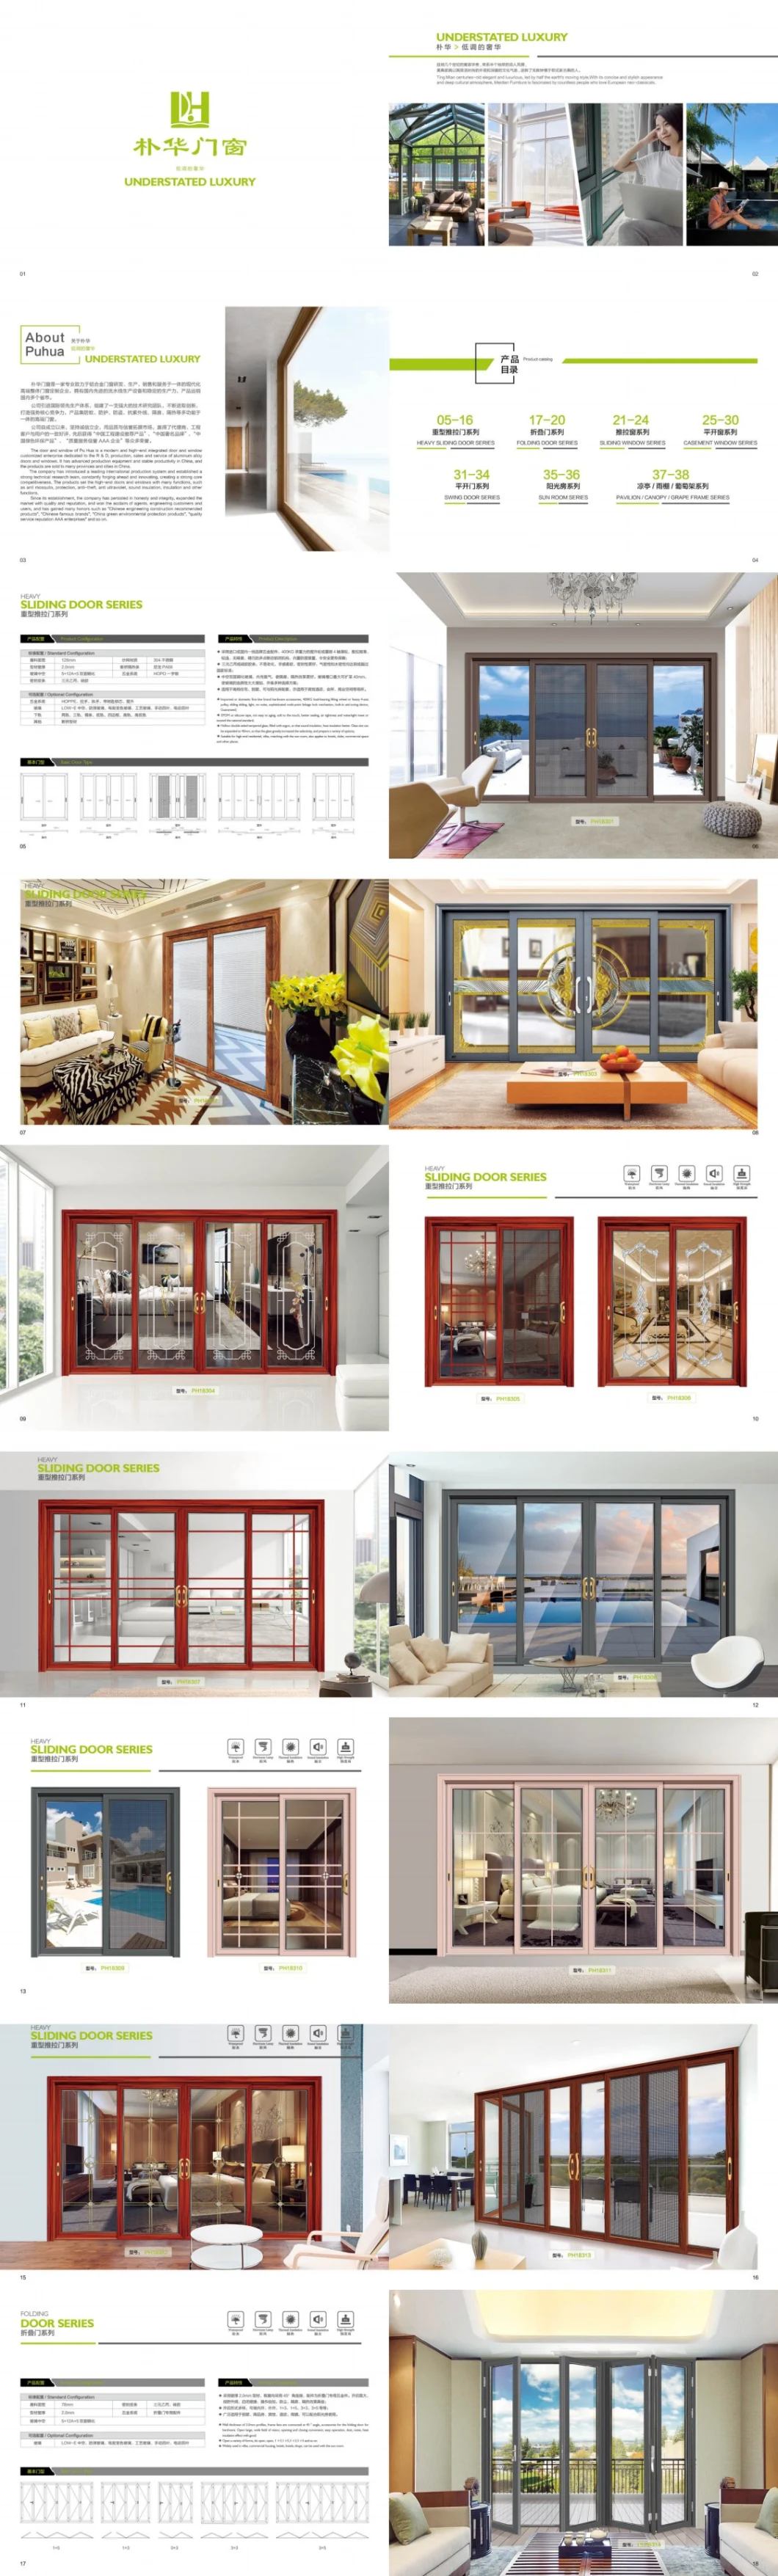 One-Stop Factory Supply Two-Track Aluminium Classic Door with Lily White Colour